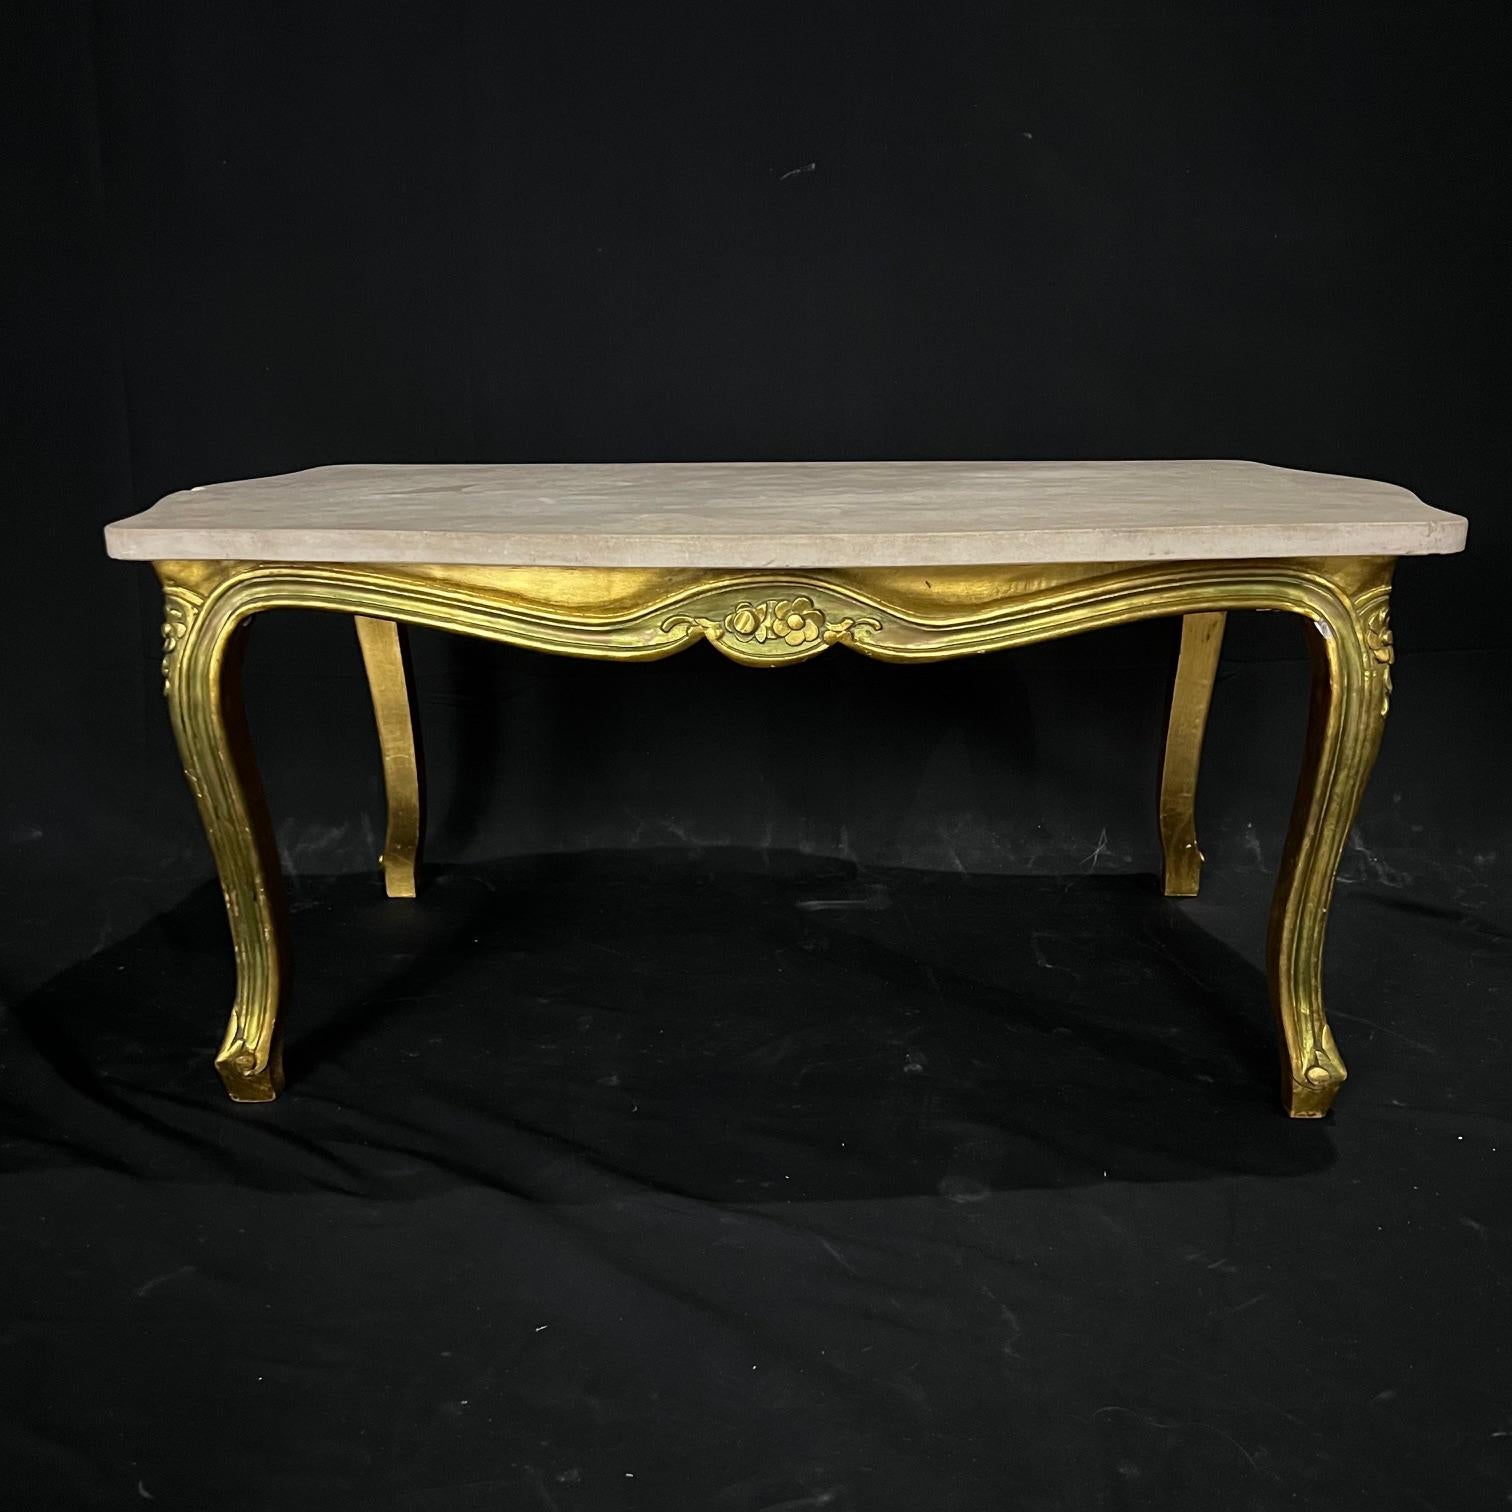  French Louis XV Giltwood Coffee Table with Stone Top  In Good Condition For Sale In Hopewell, NJ